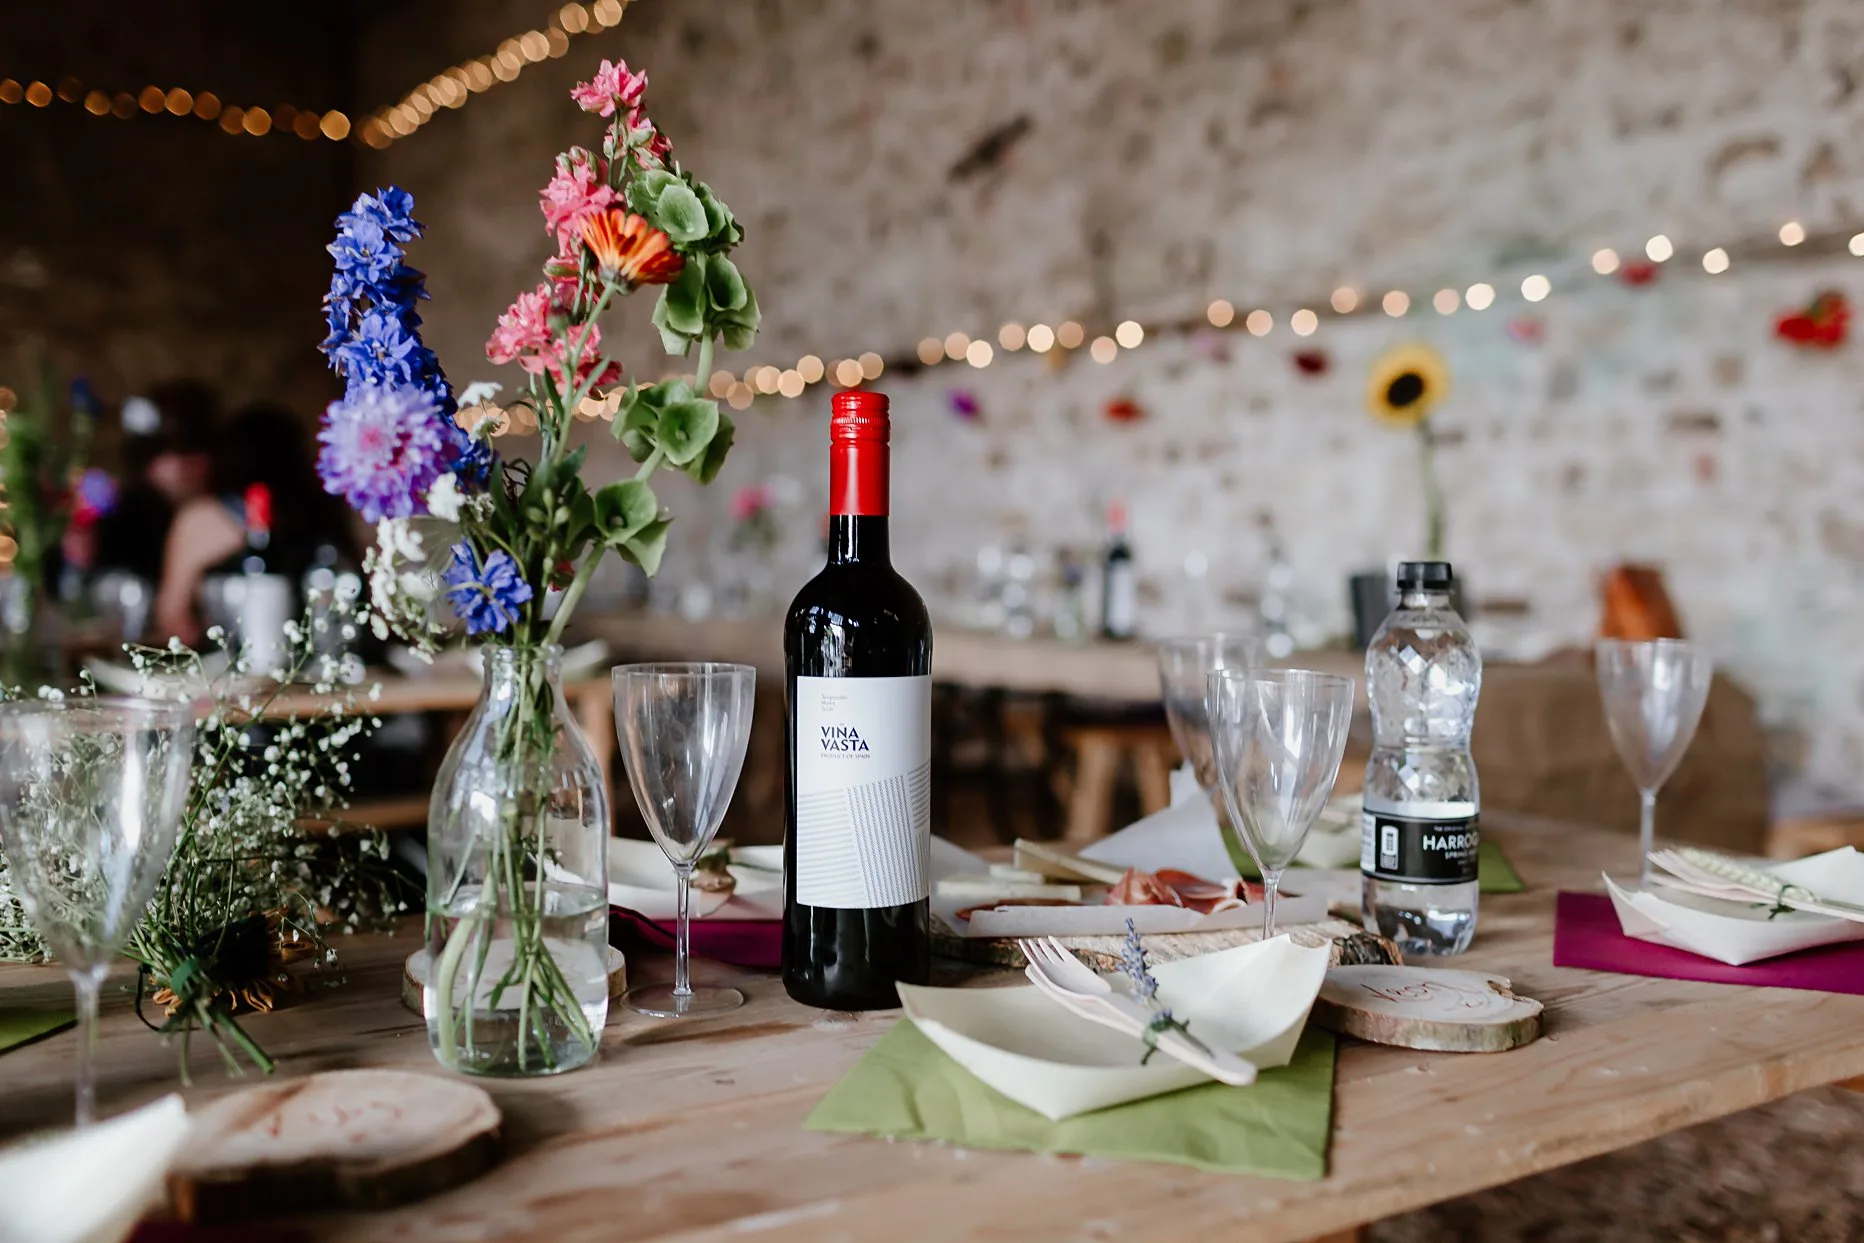 Brightly coloured flowers in a vase next to a bottle of wine. Table dressed for a wedding at Camp Katur.